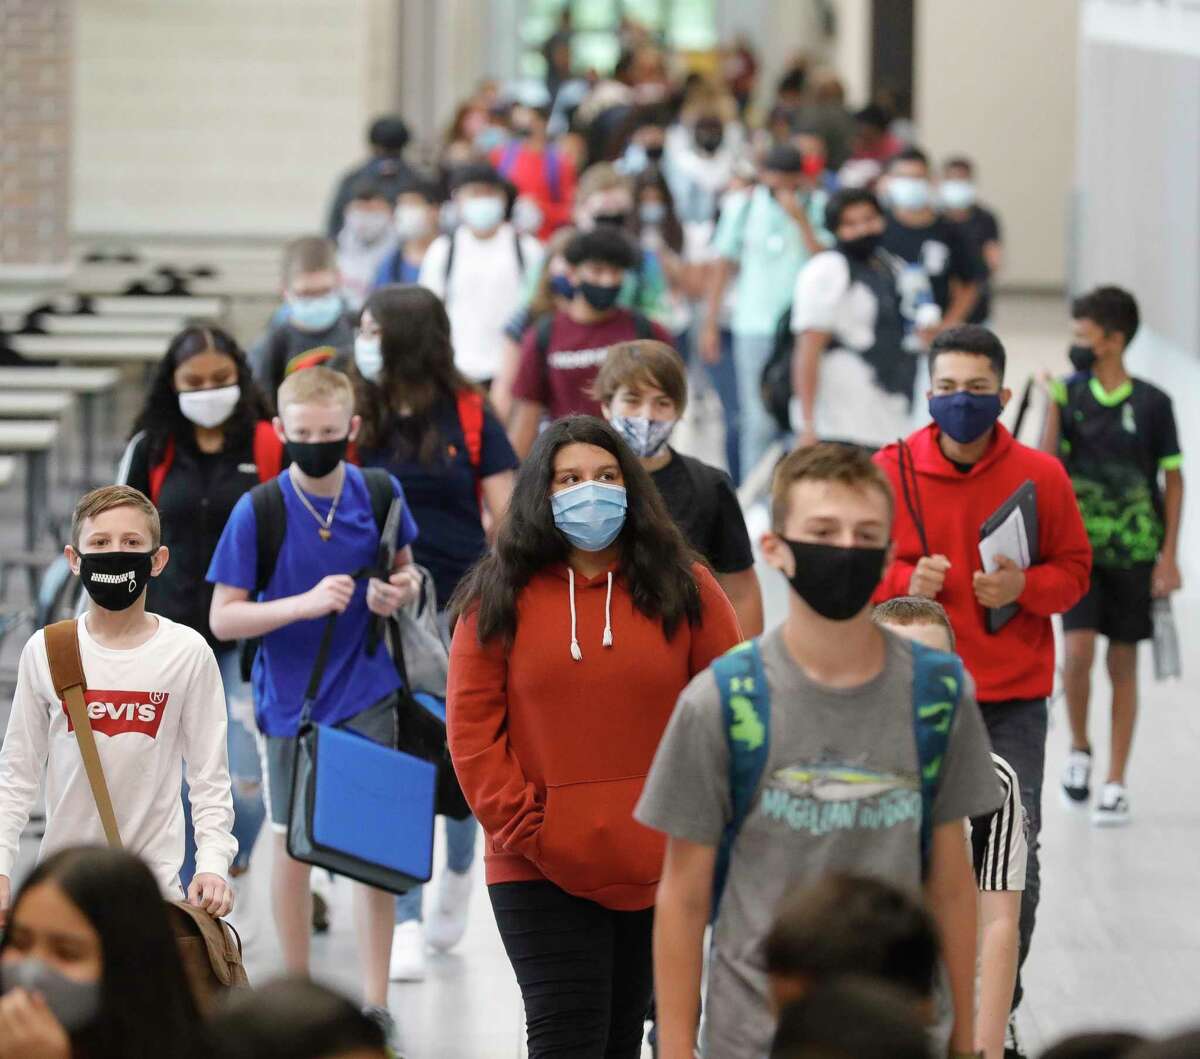 Students wear face masks while walking the hallways of Stockton Junior High School on the first day of in-person school for Conroe ISD, Tuesday, Sept. 8, 2020, in Conroe.